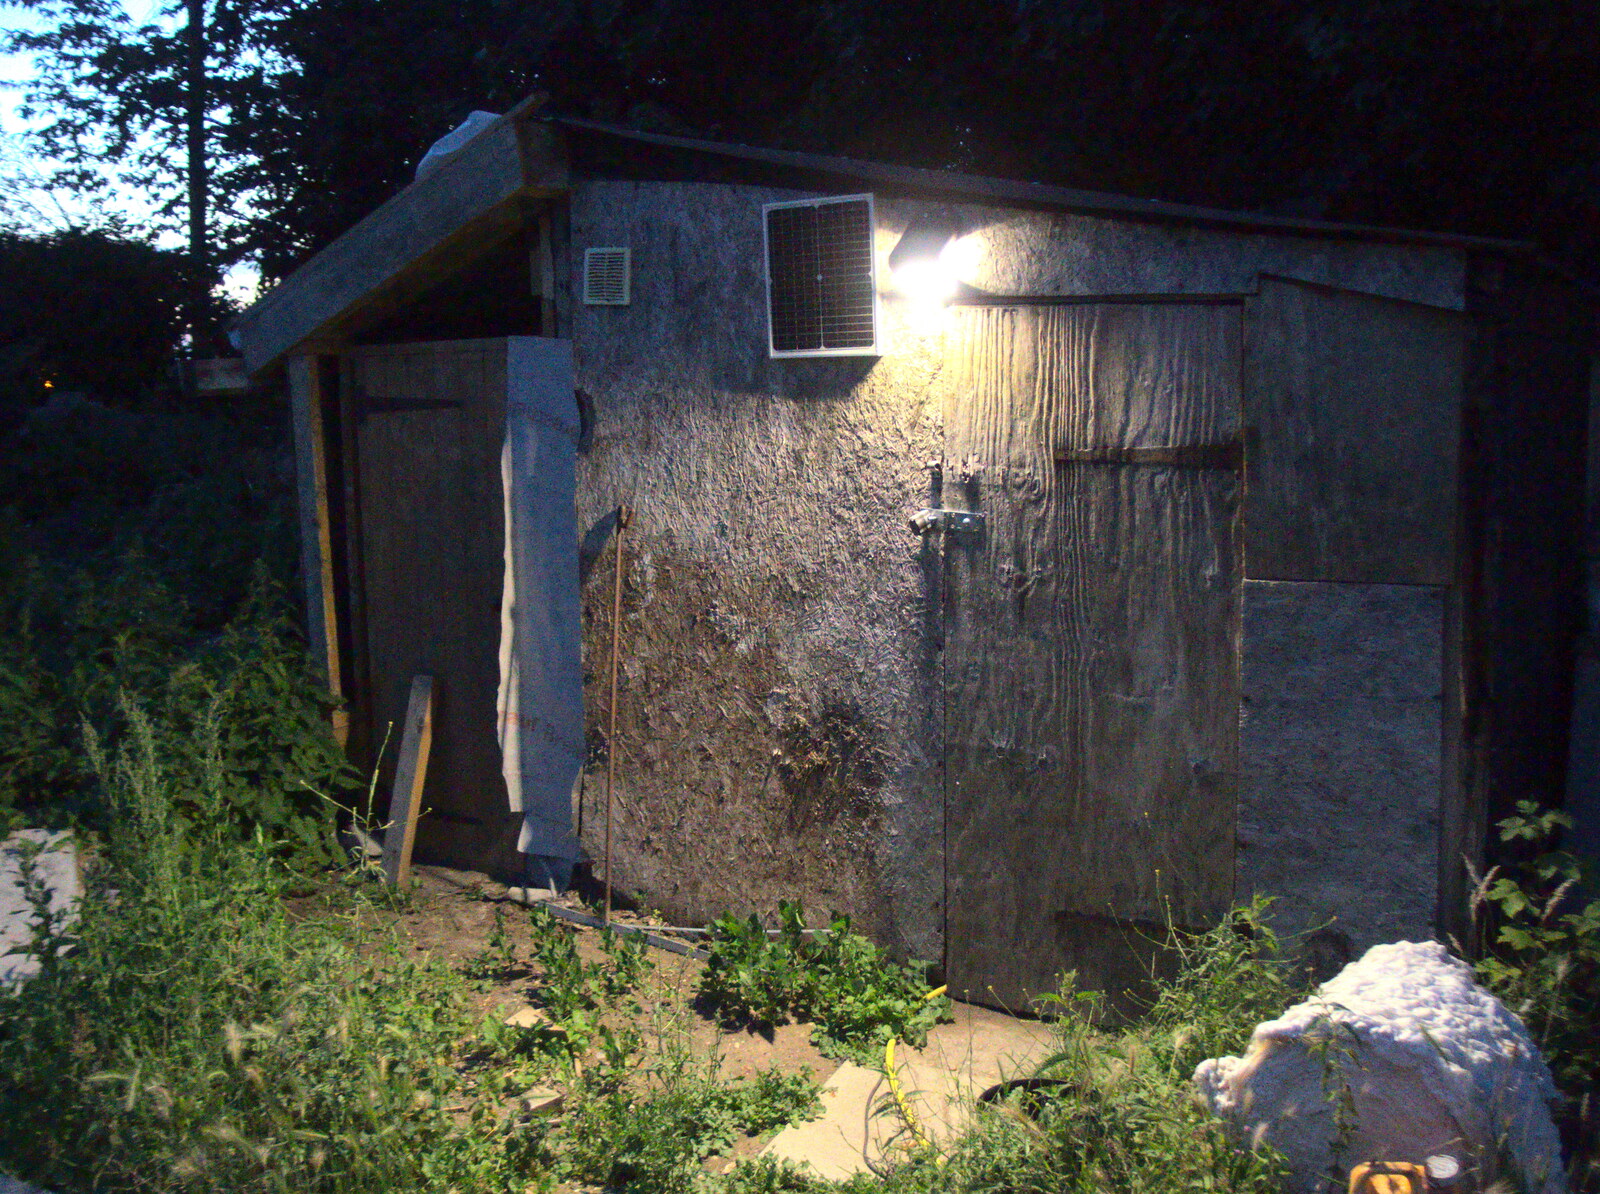 A shed in the dusk from The BSCC at Redgrave and Station 119, Eye, Suffolk - 17th July 2020